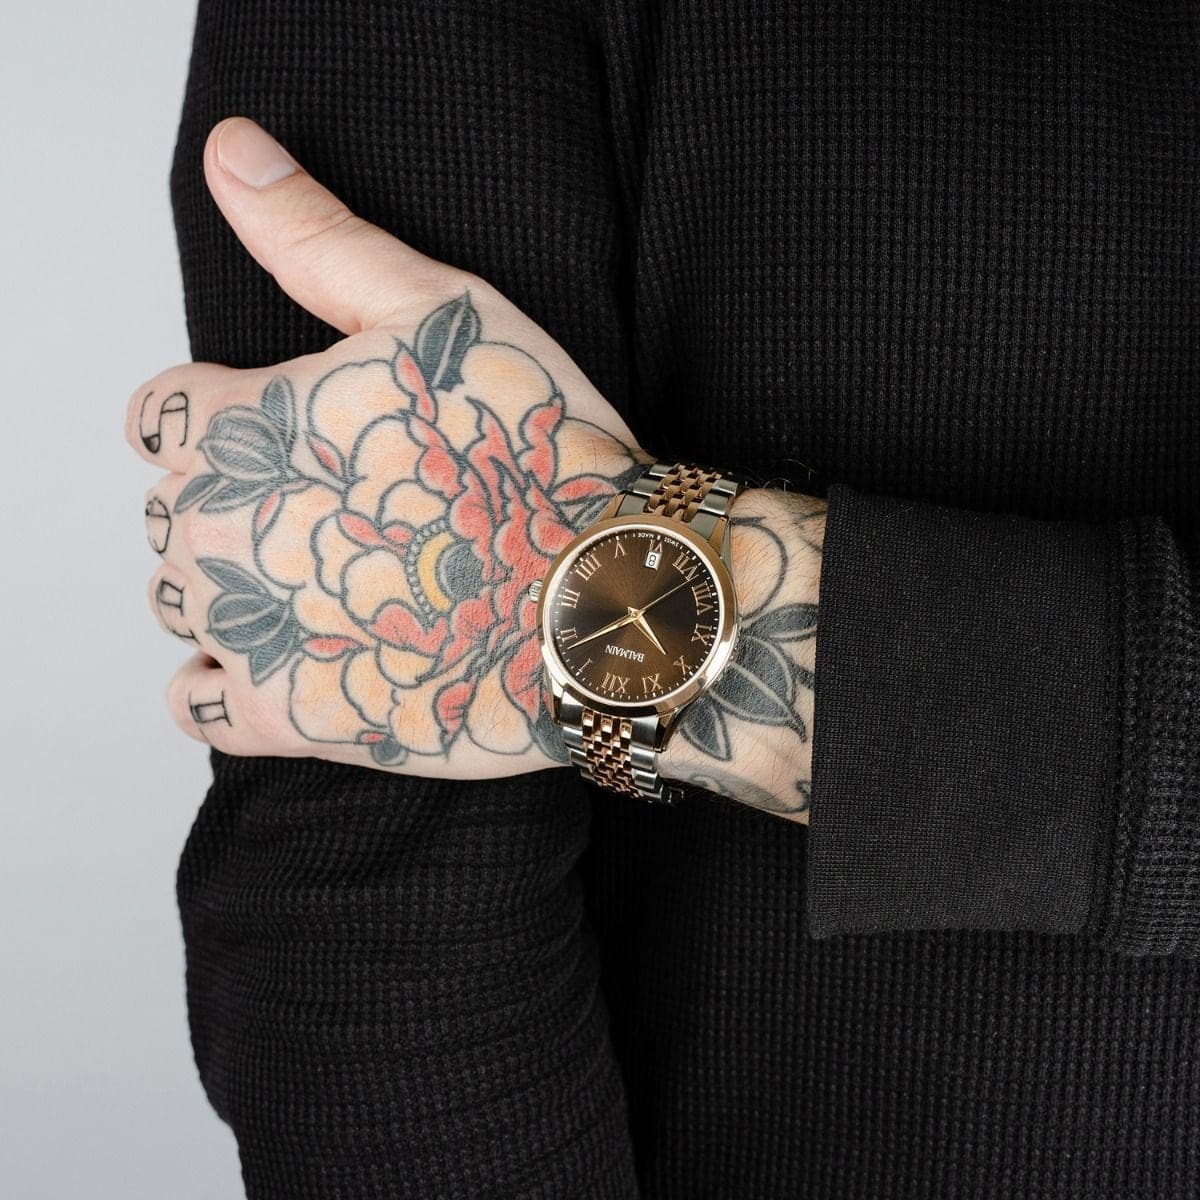 Realistic Half Sleeve Black Cross Tattoo Sticker For Women And Men Compass  Agents Design With Animal, Bird, Clock, And Flower Designs From Soapsane,  $8.13 | DHgate.Com